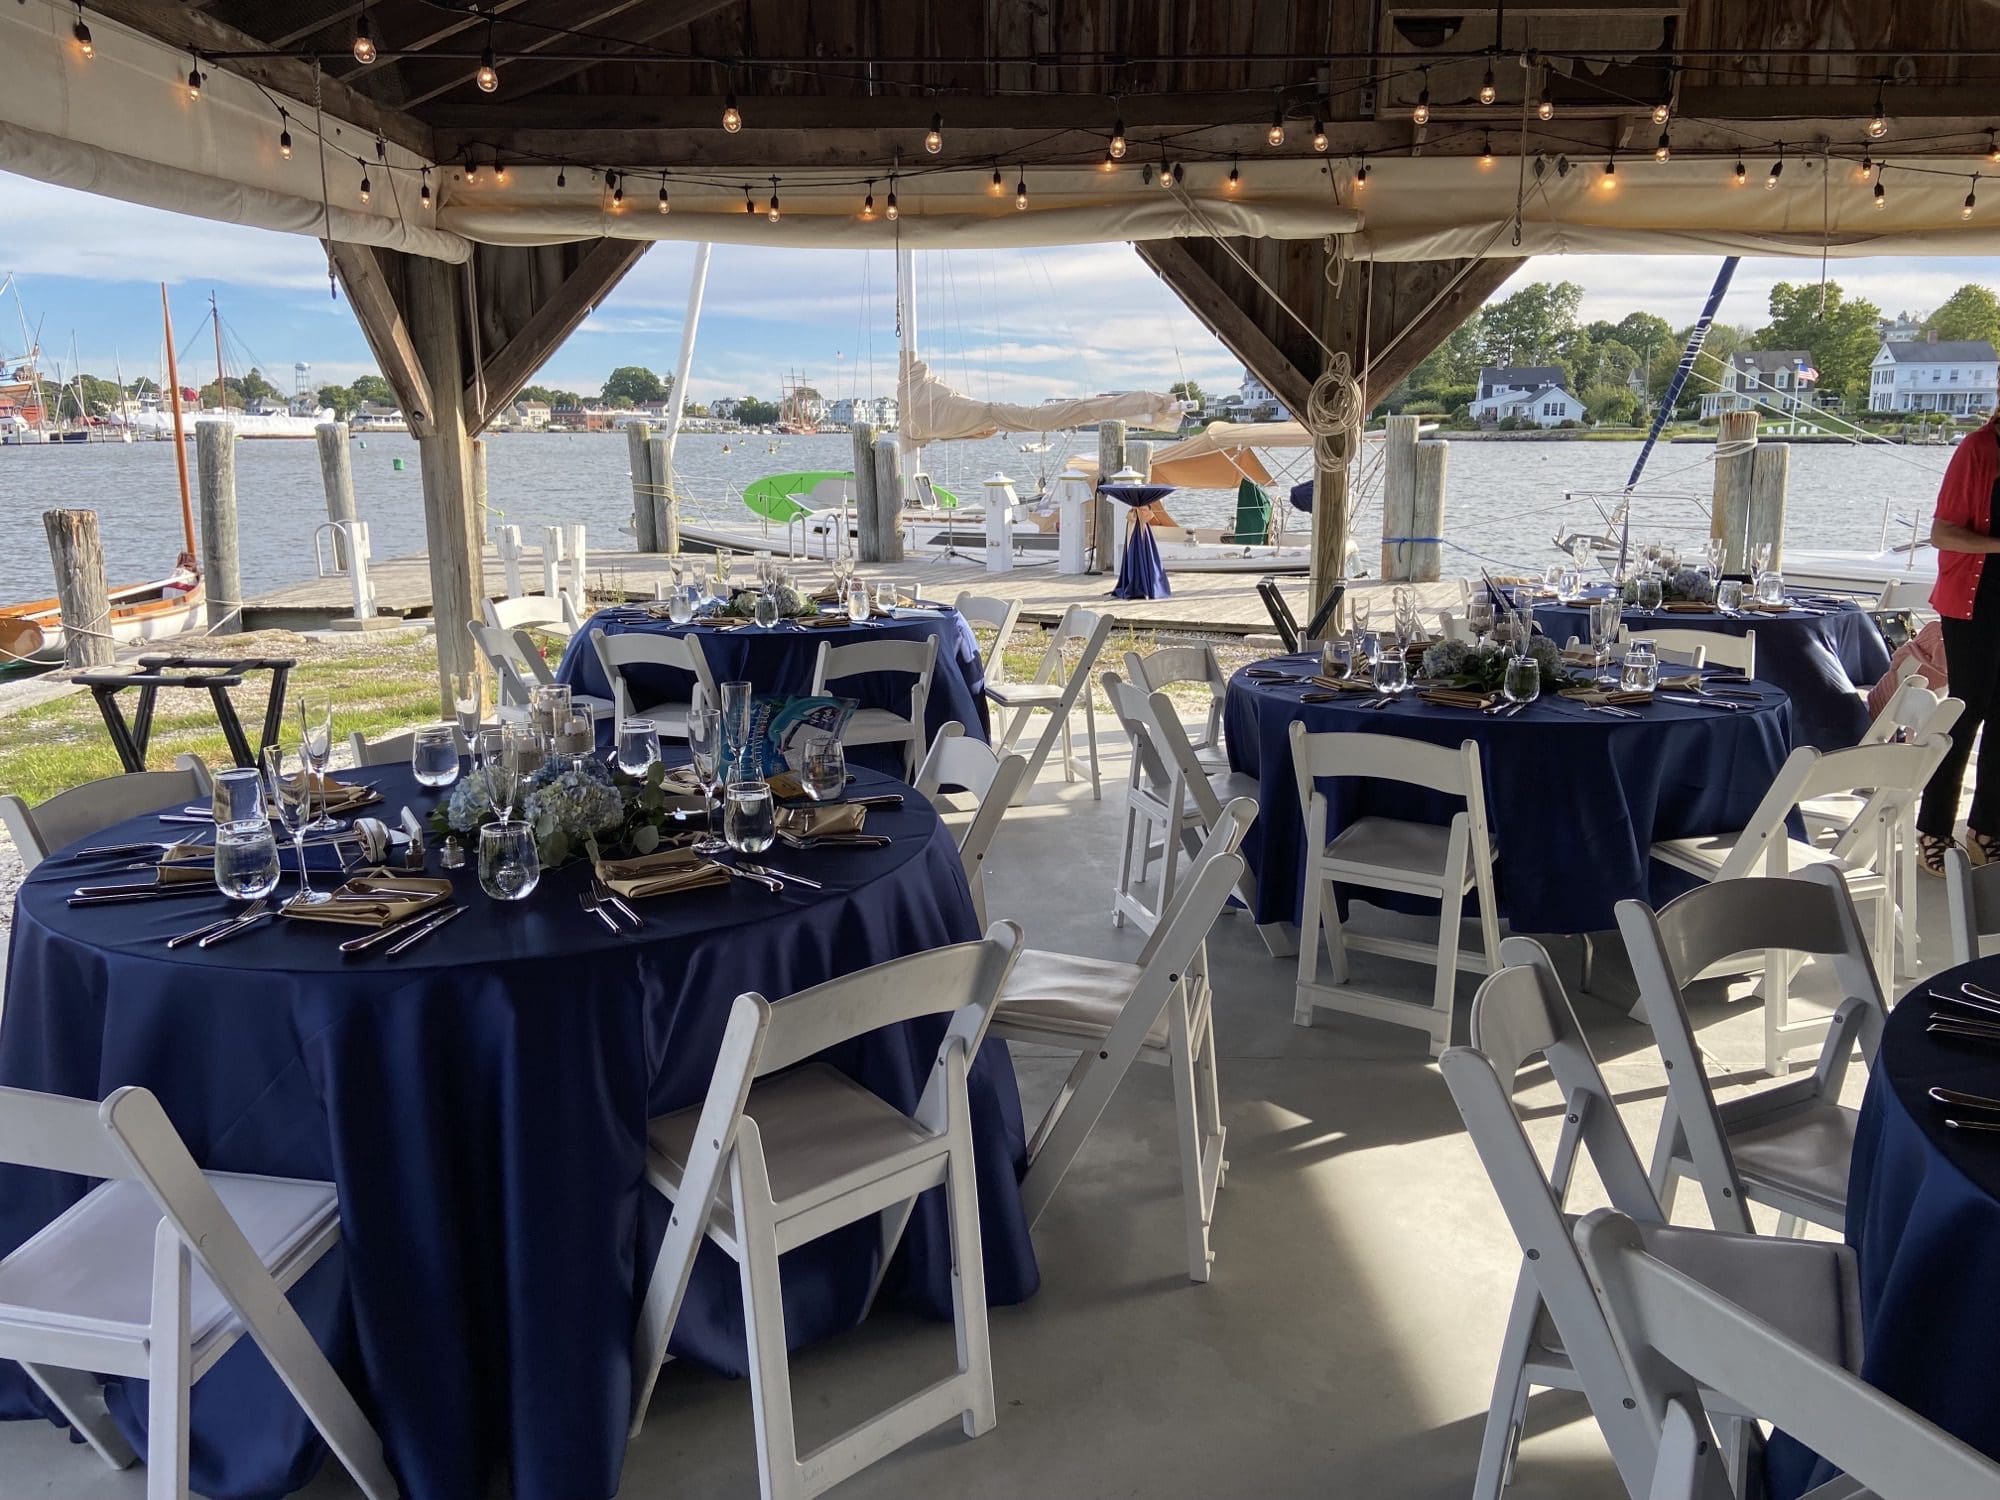 Decorated event tables underneath pavilion with view of water and docks